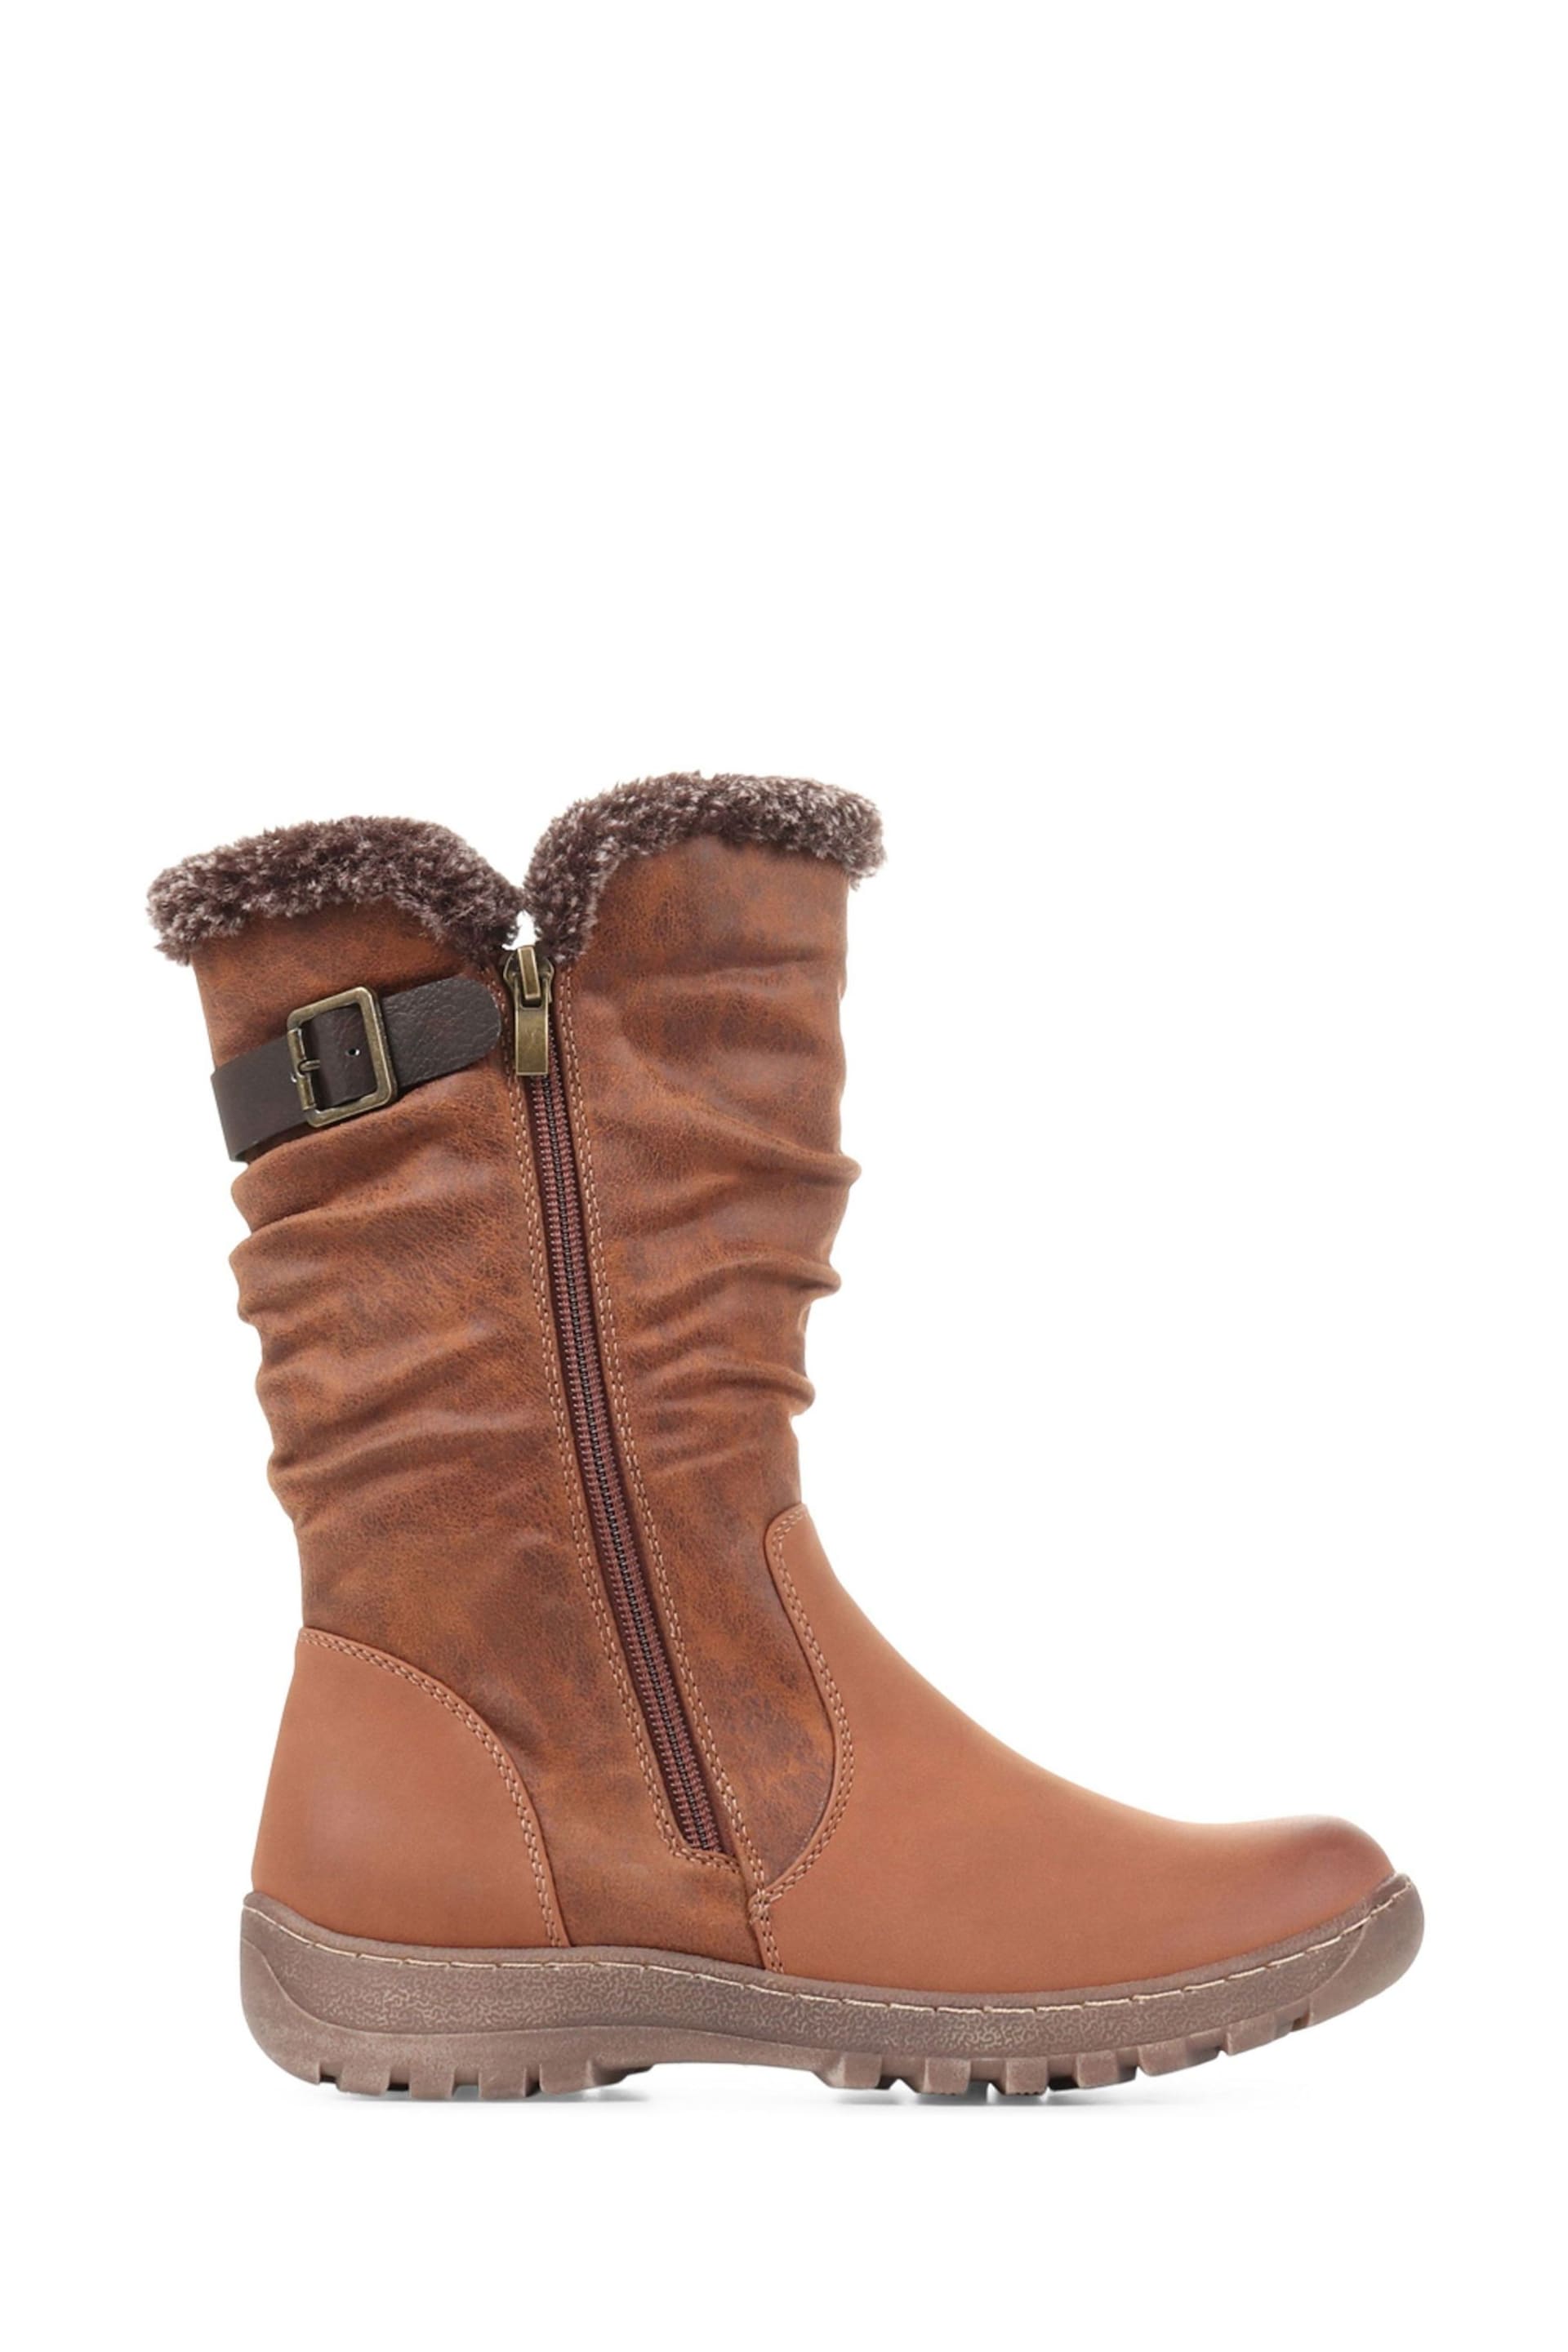 Pavers Lightweight Brown Calf Boots - Image 1 of 5